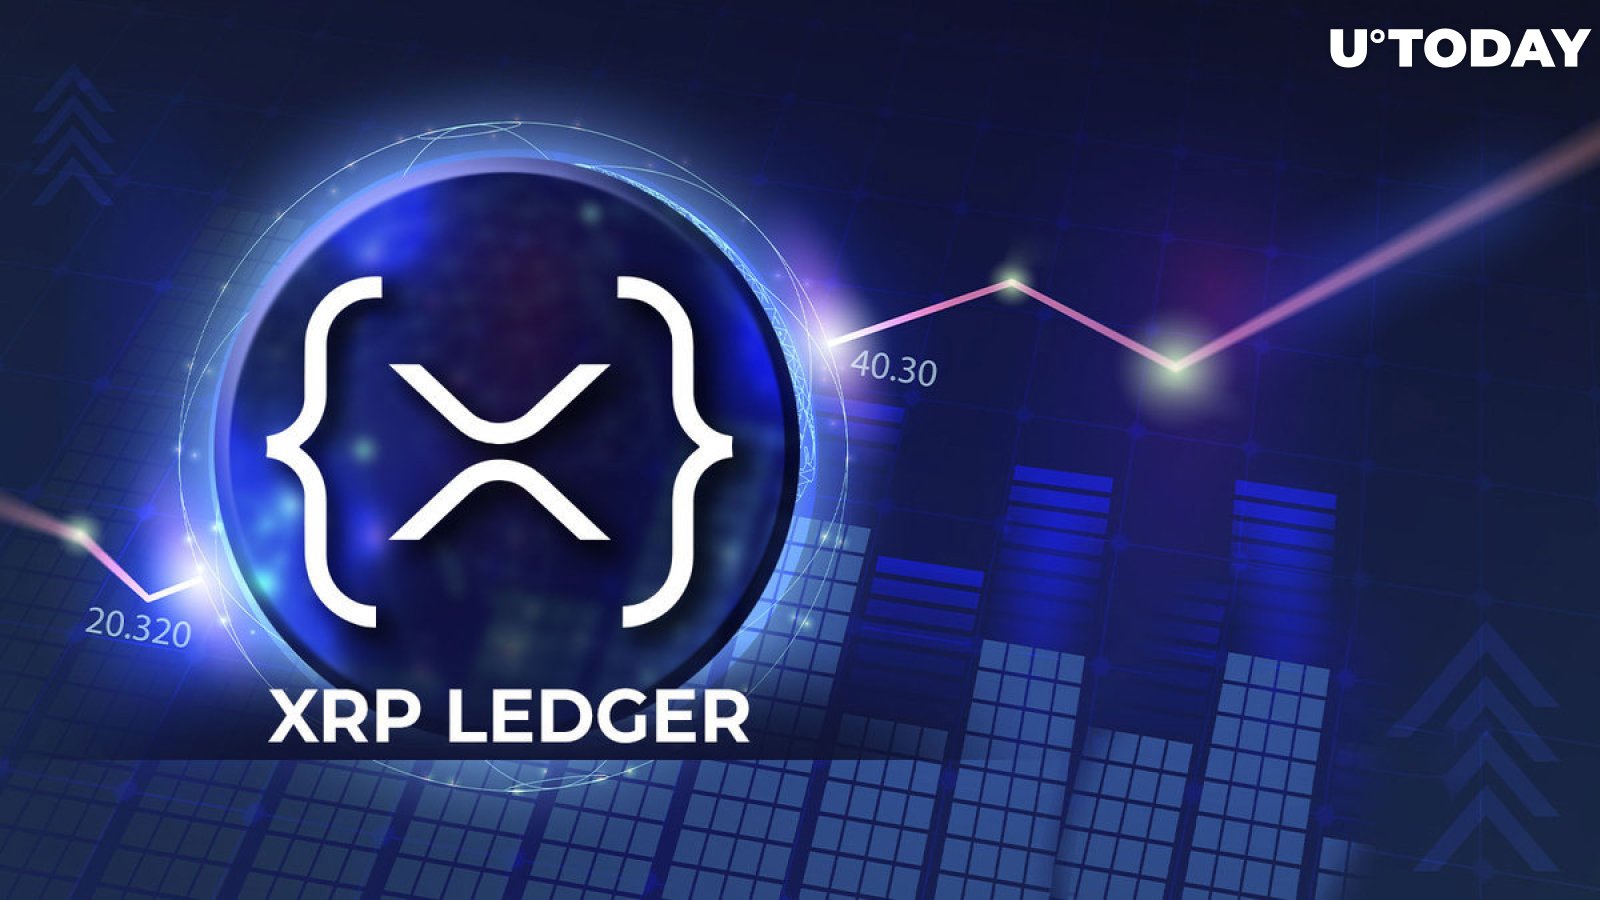 XRP Ledger (XRPL) Welcomes New AMM Pools in Epic DEX Showdown